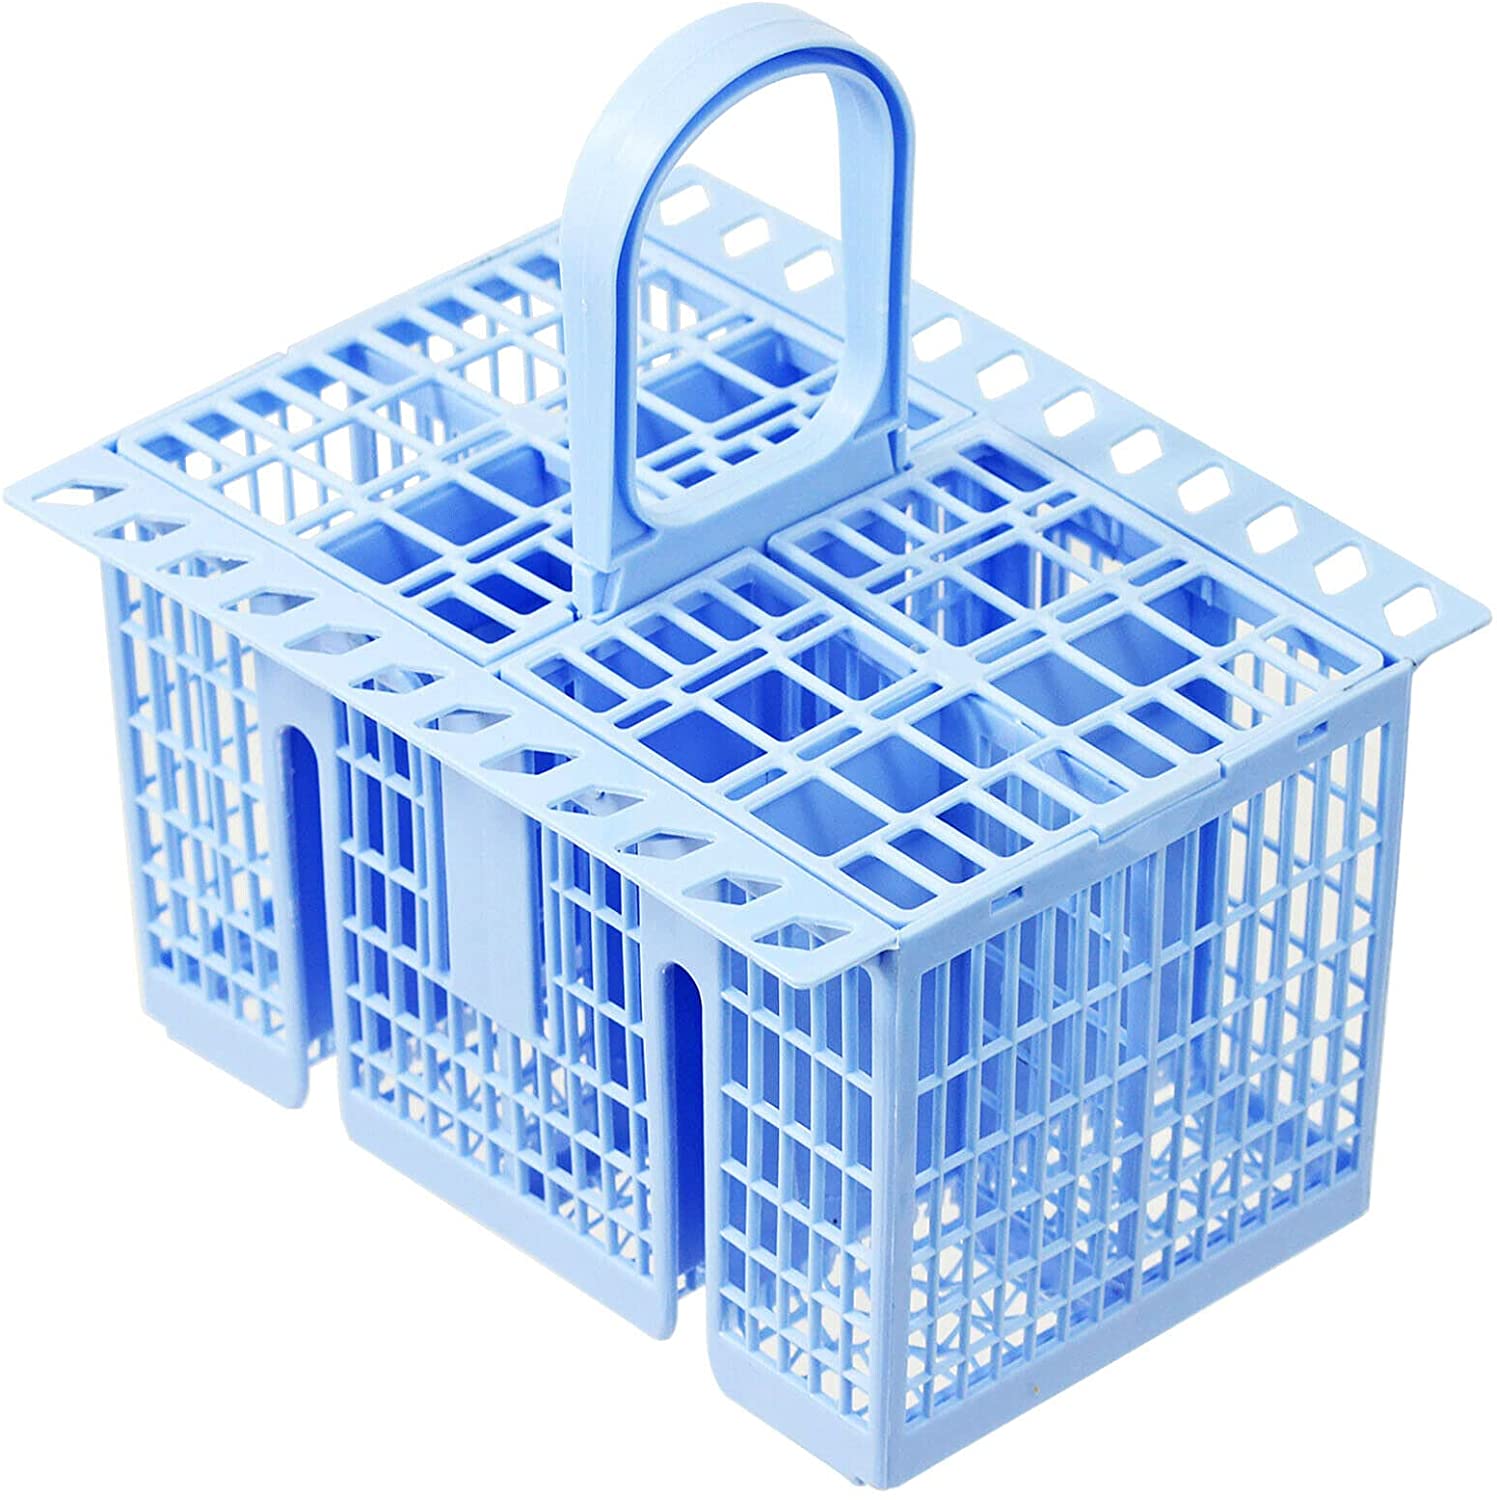 SPARES2GO Cutlery Basket compatible with Miele Dishwasher (Blue, 220 x 208 x 160mm)